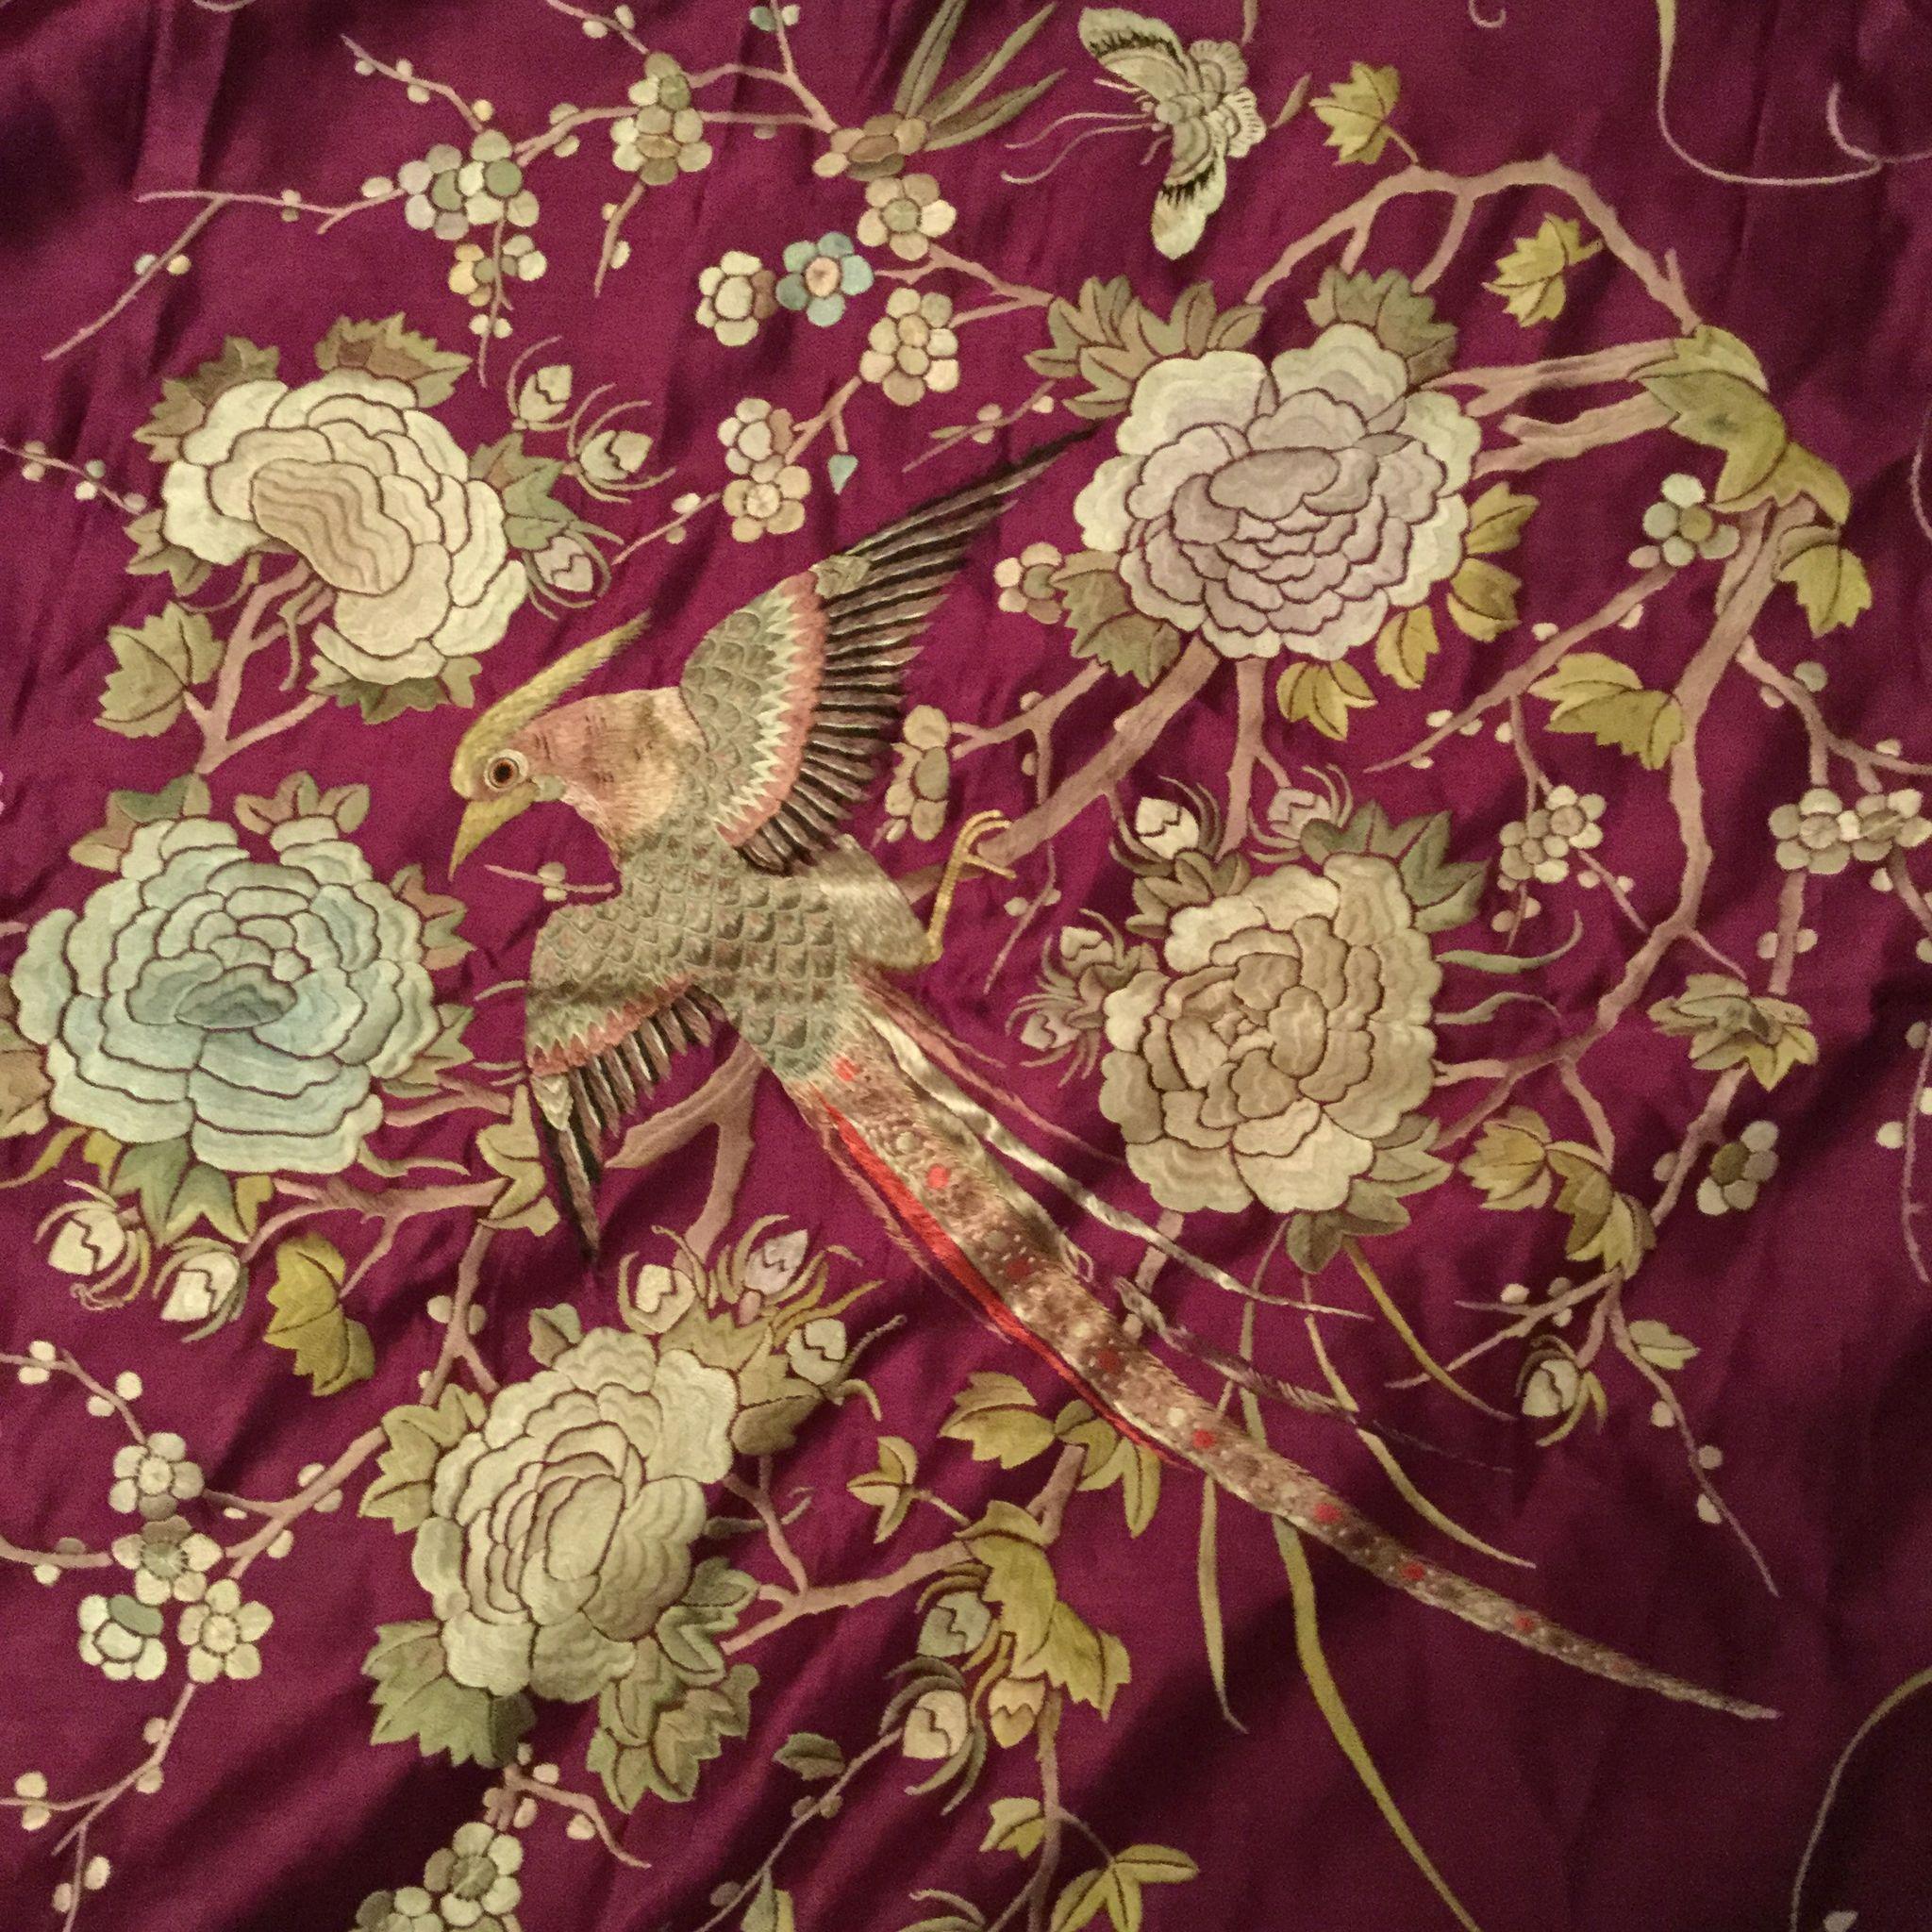 Extremely Fine Purple-red  Antique Chinese bed cover or wall hanging,  elaborately embroided in coloured silk  with a central medallion with a Bird (Phoenix) surrounded by branches, flowers and foliage. Smaller four birds are embroided in the